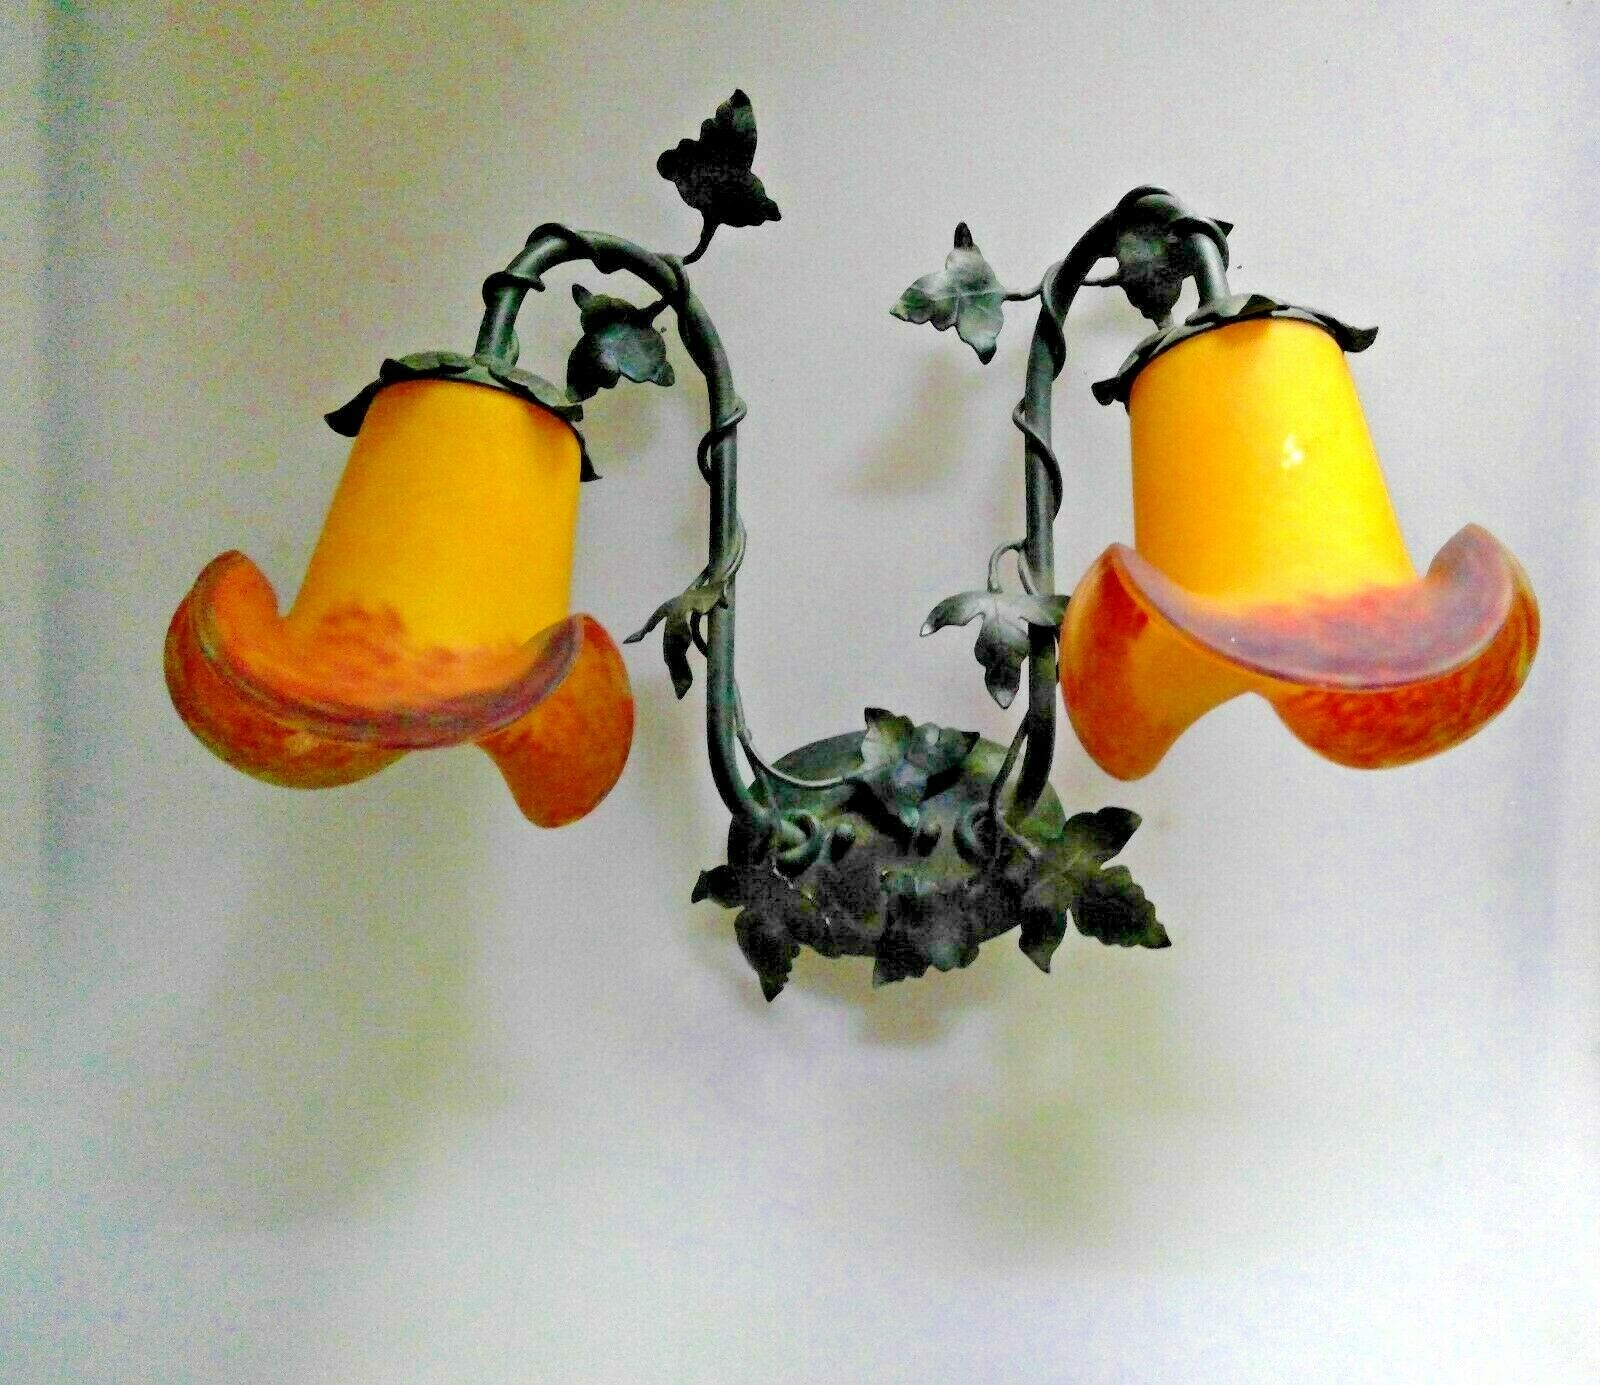 Floral Art Deco Wall Sconce Pate De Verre Art Glass Shades & Made In France Nos